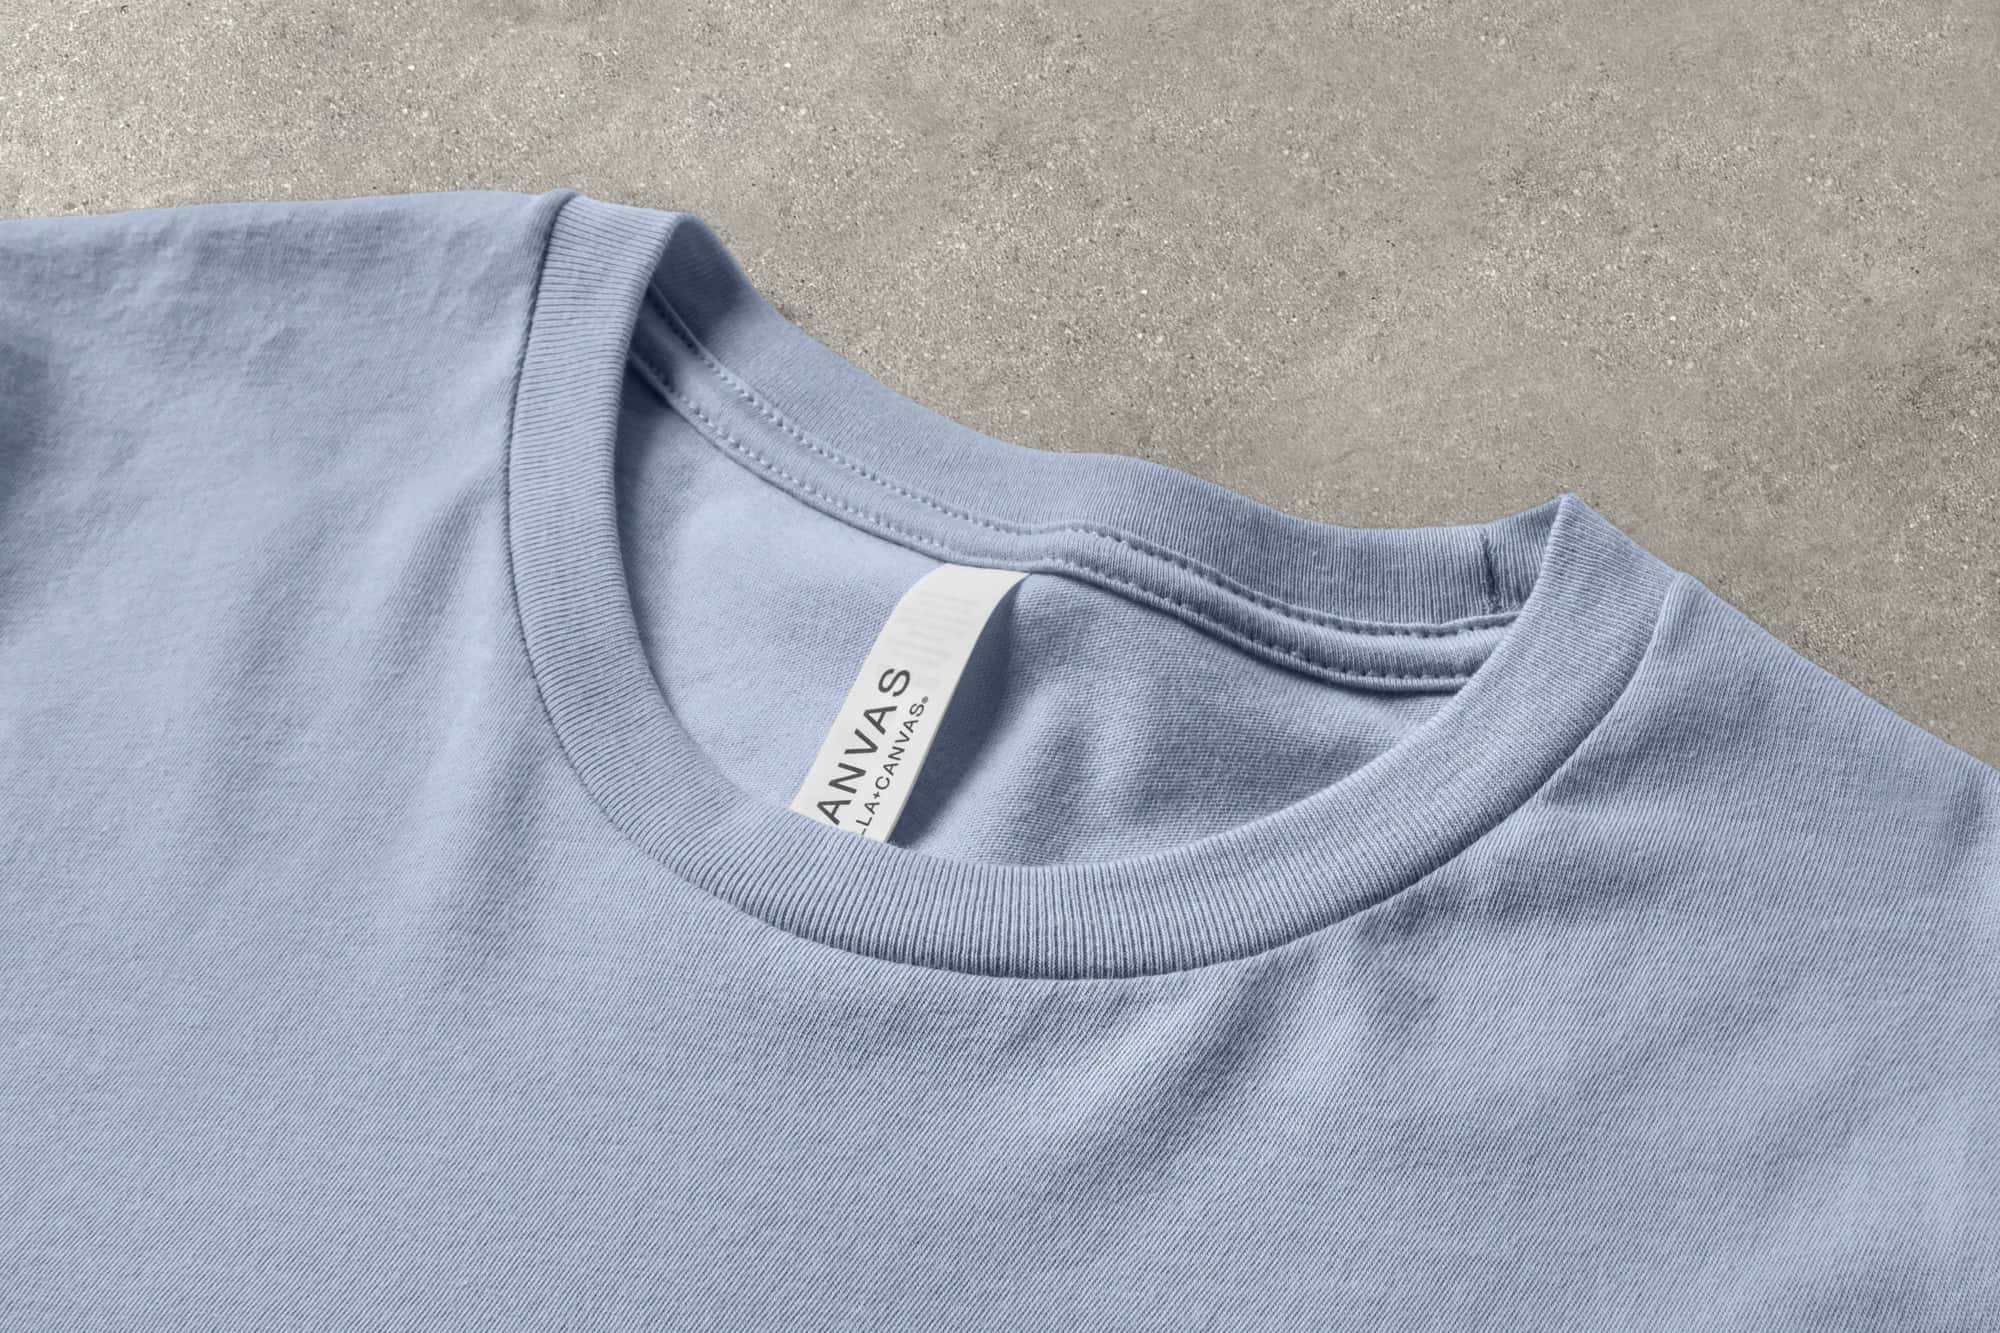 Detail image of the Bella Canvas Jersey T-Shirt's collar and tag